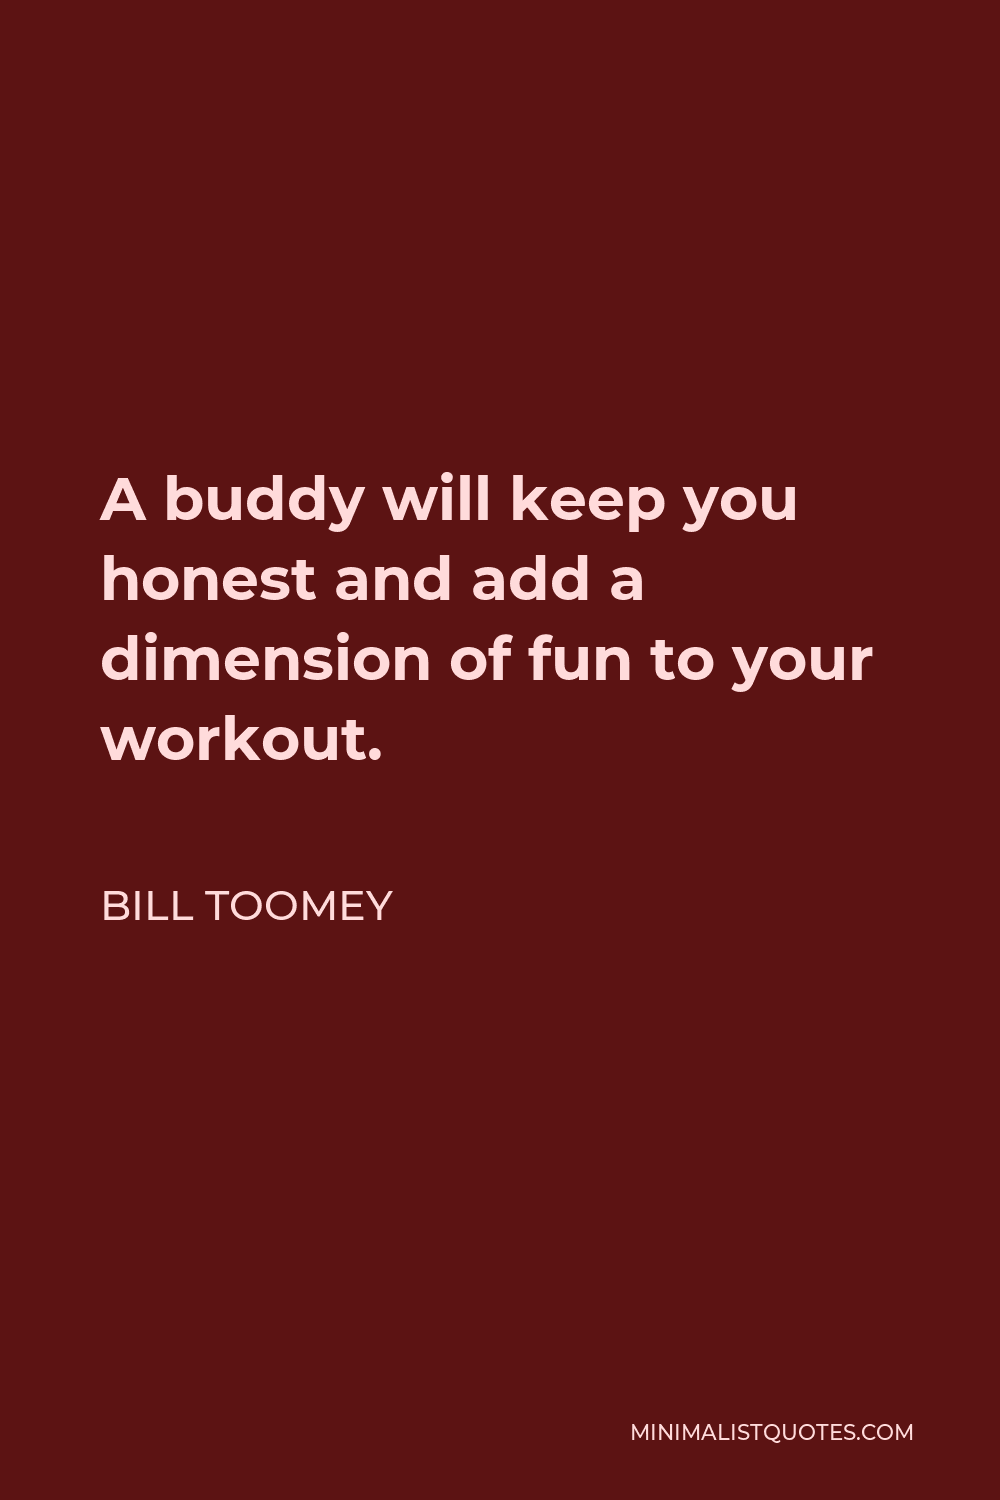 Bill Toomey Quote - A buddy will keep you honest and add a dimension of fun to your workout.